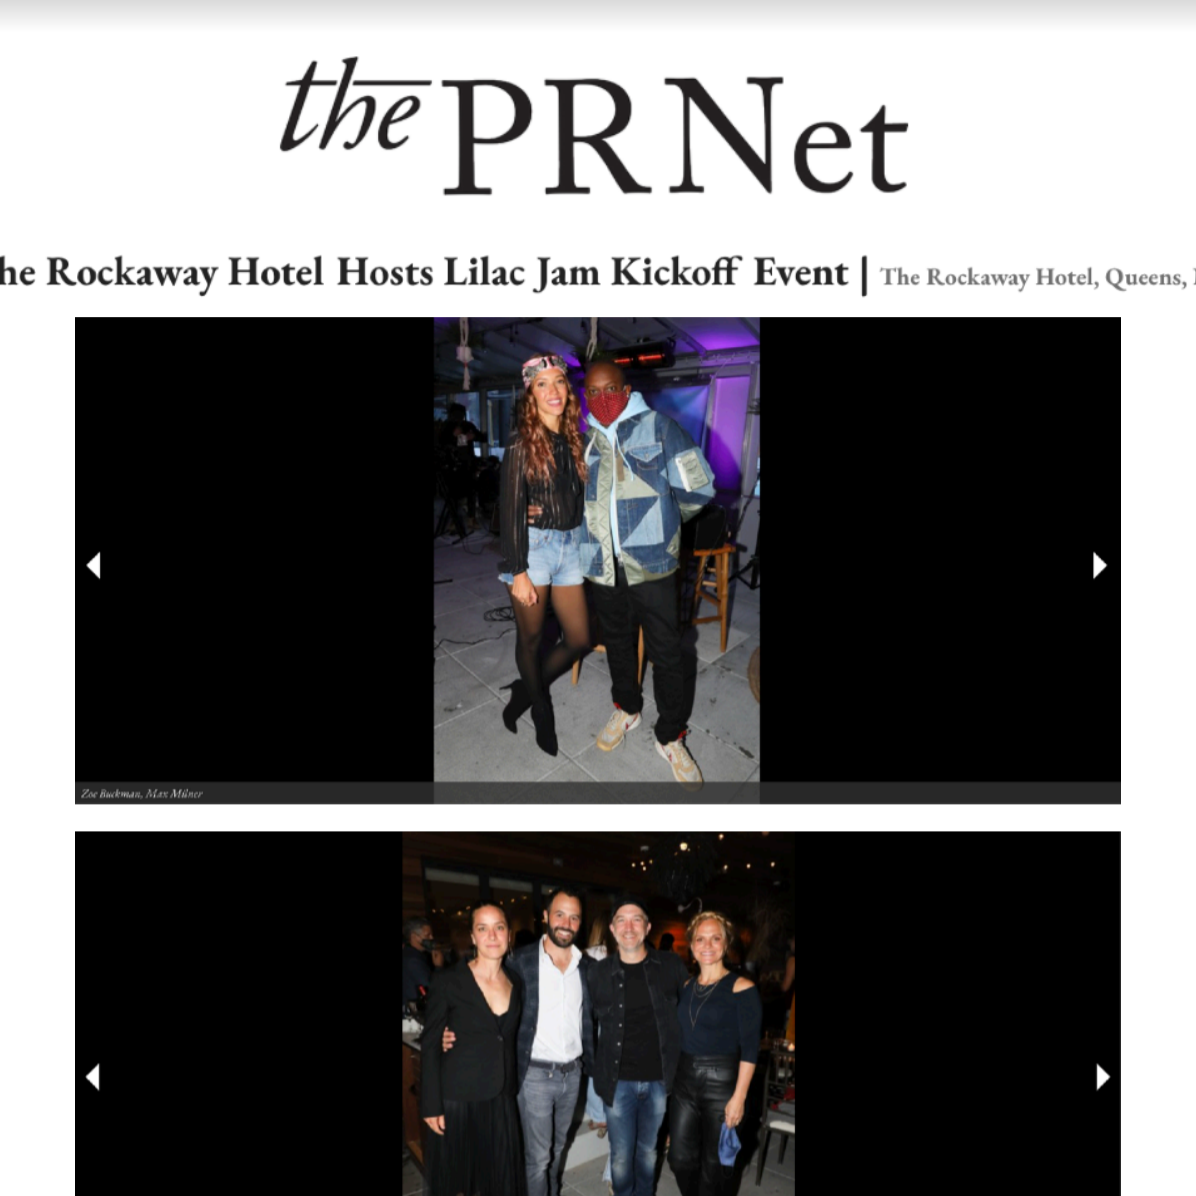 Article from The PRNet at The Rockaway Hotel